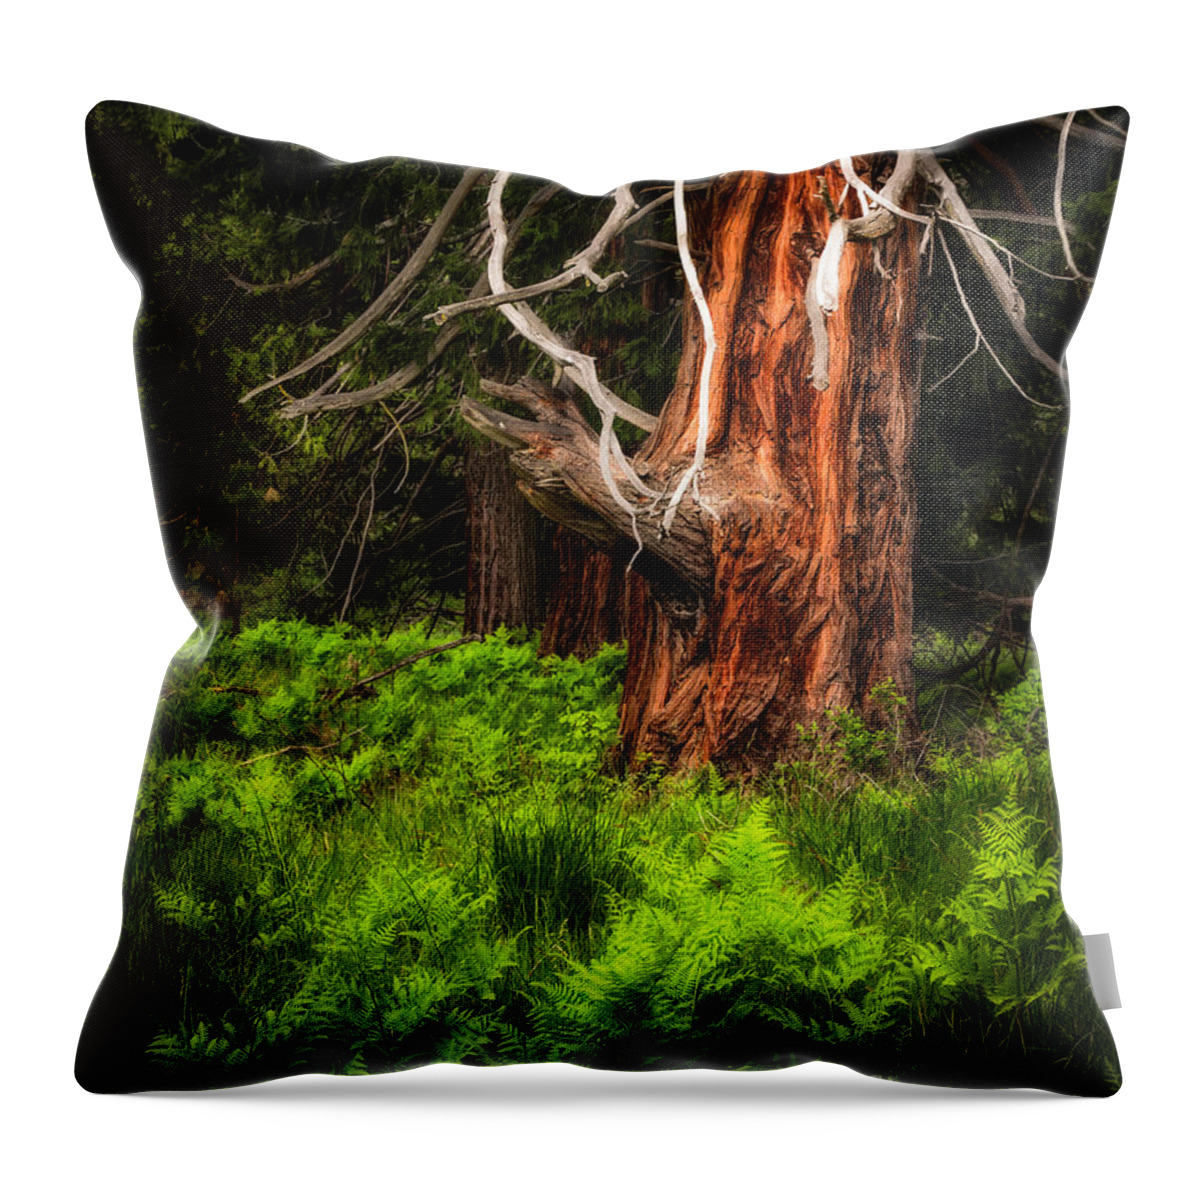 Yosemite Throw Pillow featuring the photograph The Old Tree by Anthony Michael Bonafede